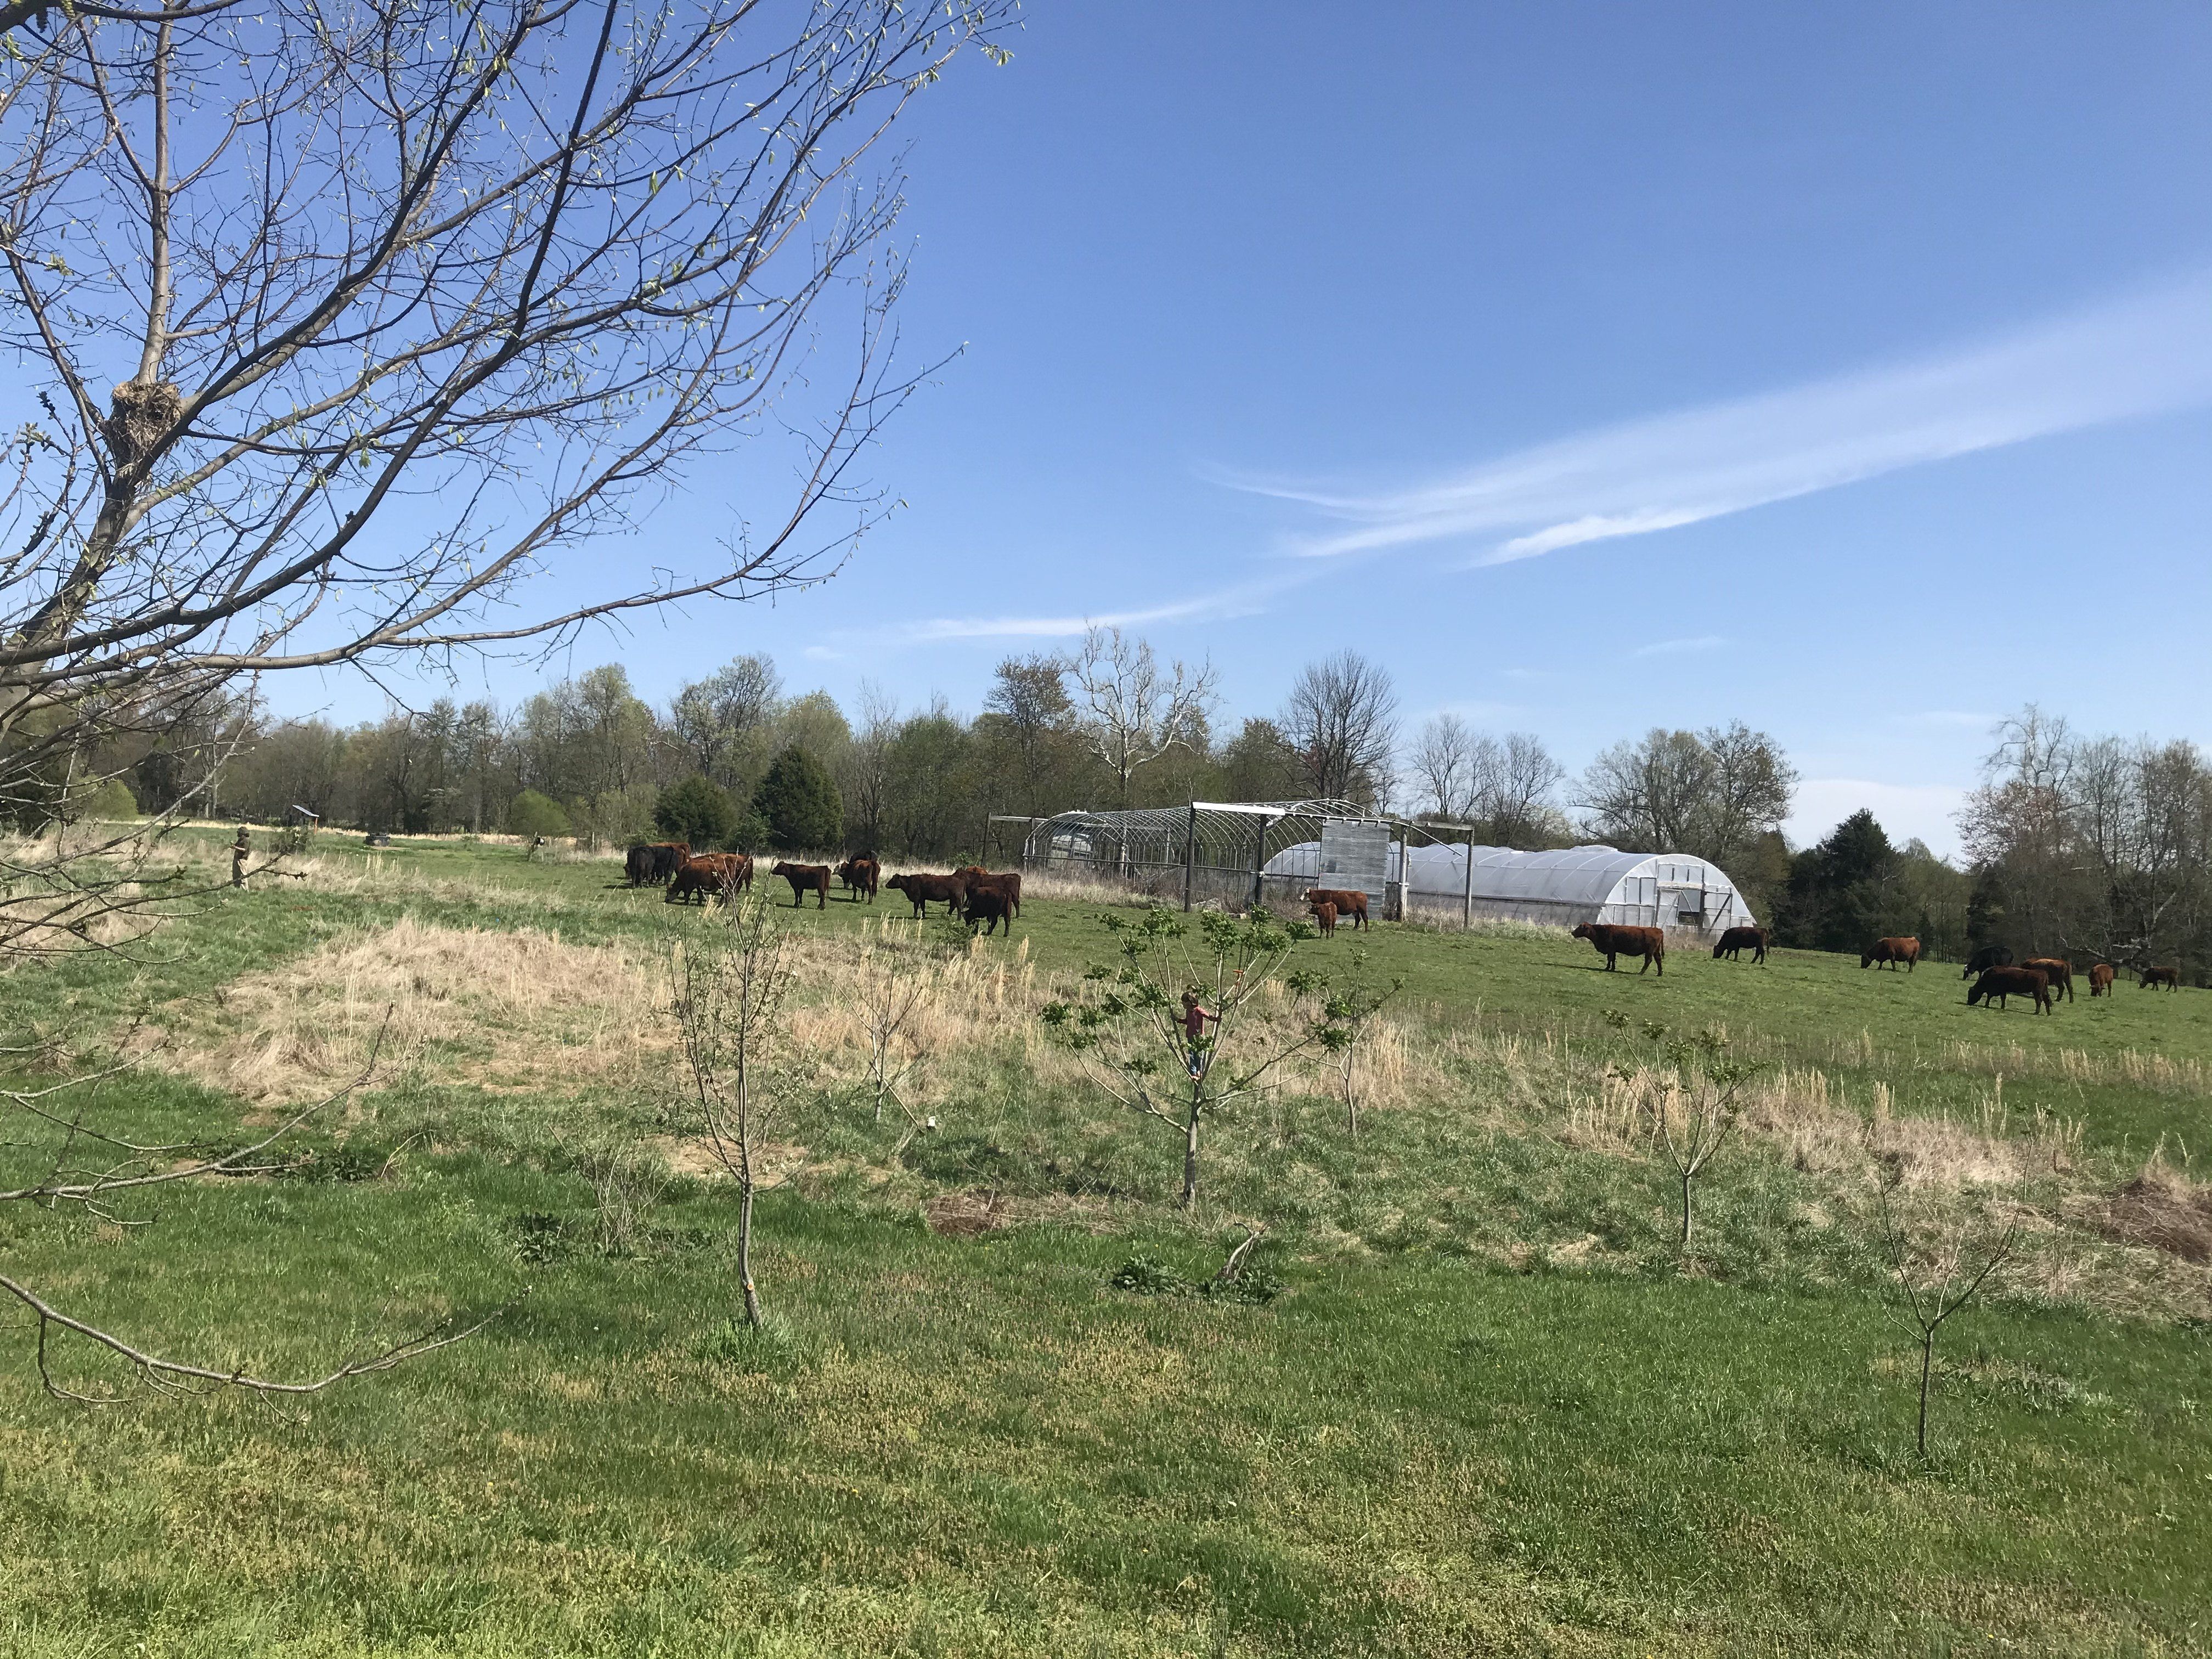 Next Happening: Meat Farm Happenings for May 26, 2020